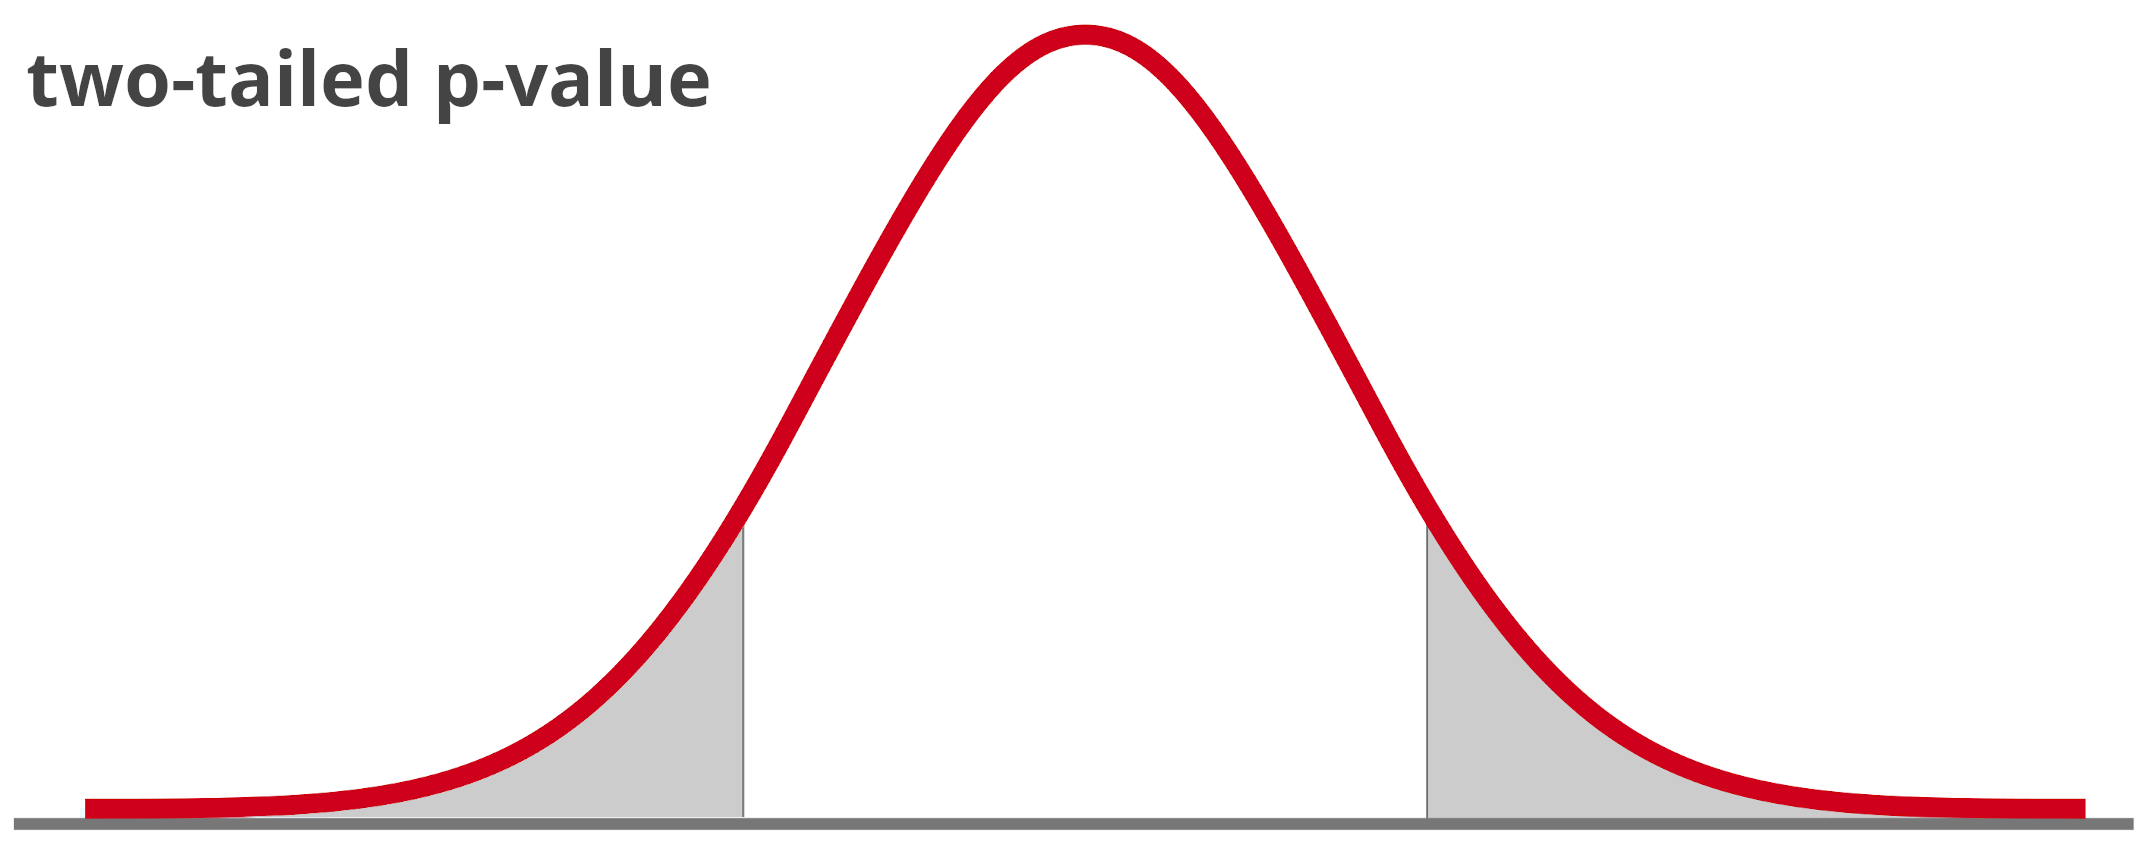 graphic showing a two-tailed p-value for a standard normal distribution